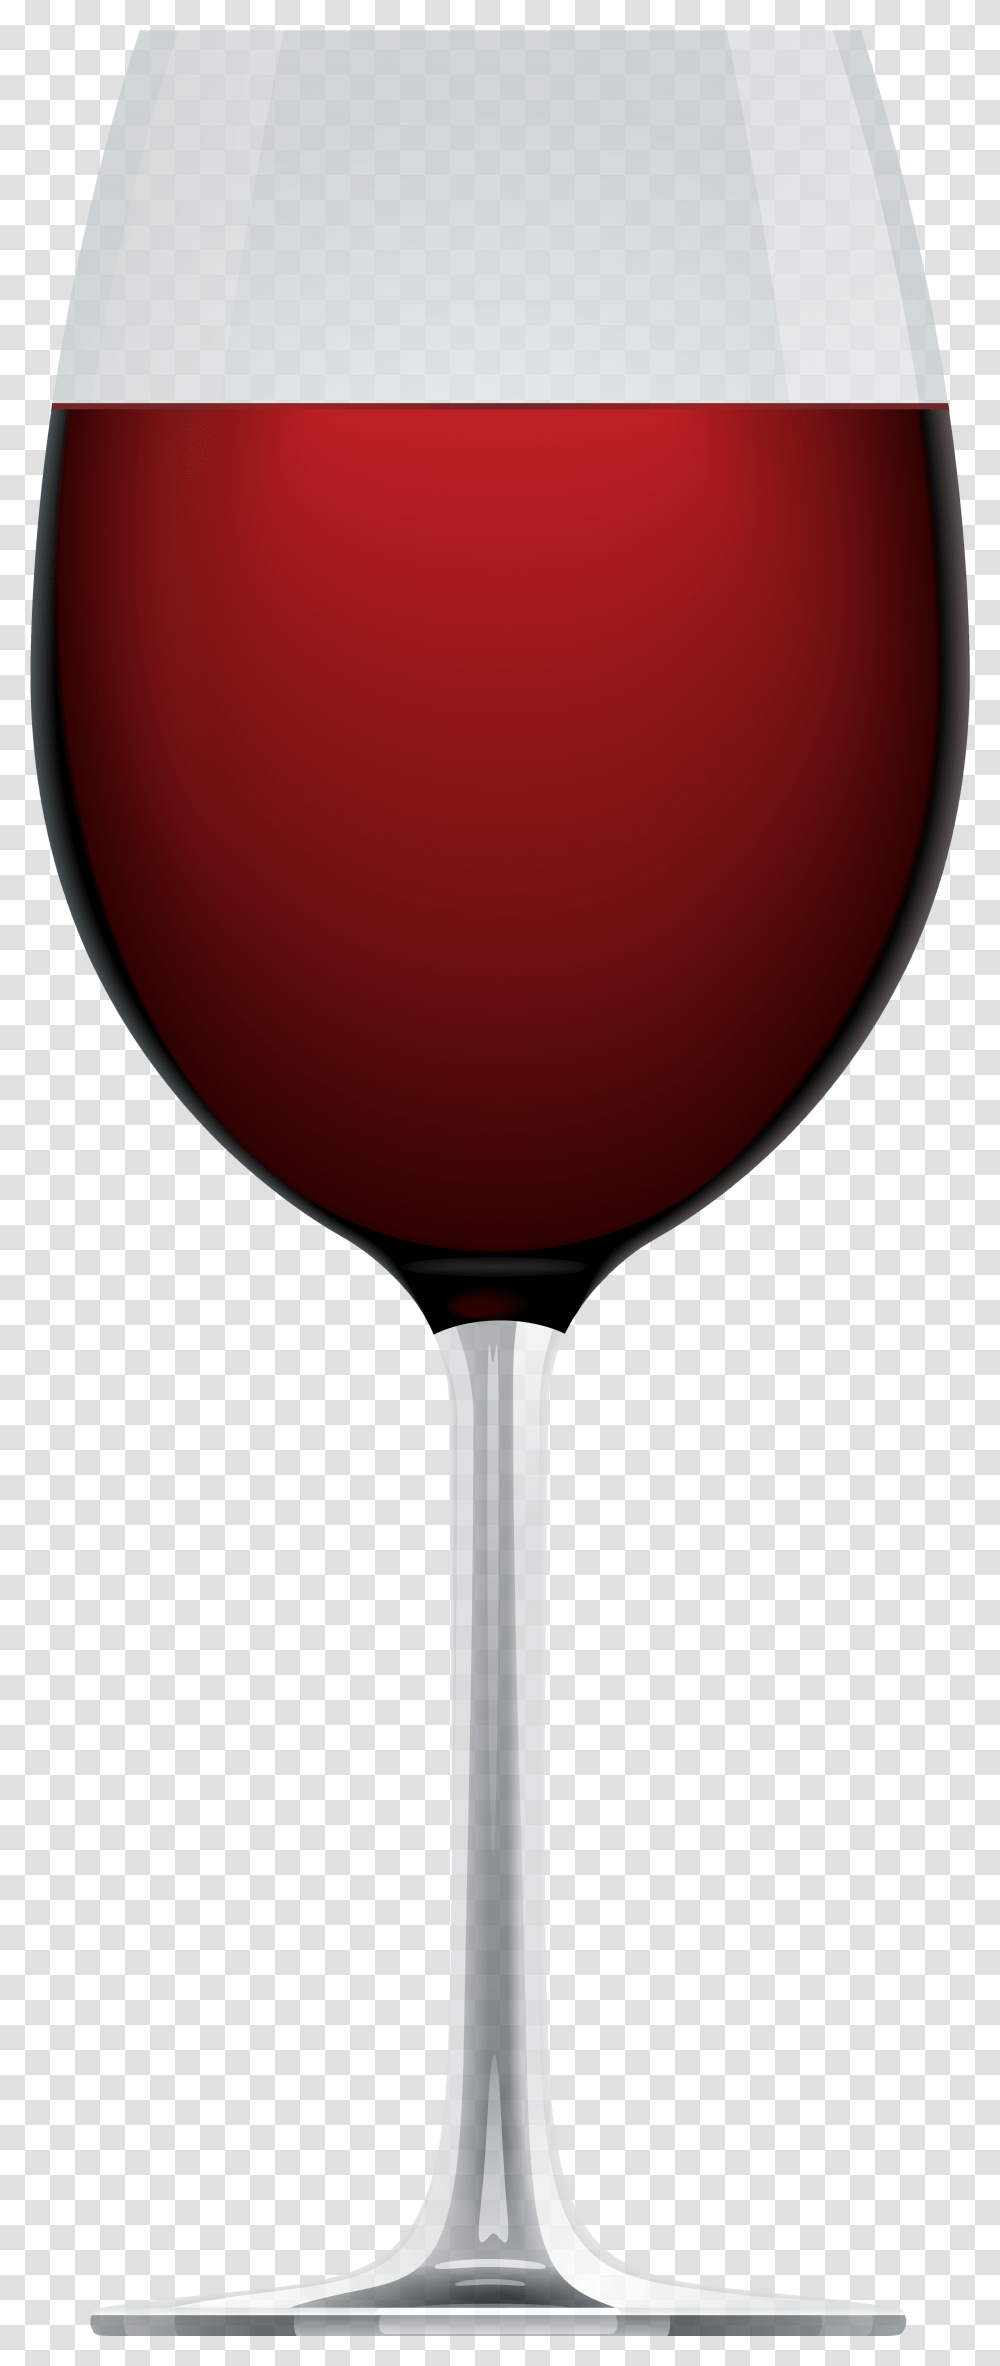 Wine Glass Clip Art Wine Glass Background, Alcohol, Beverage, Drink, Red Wine Transparent Png